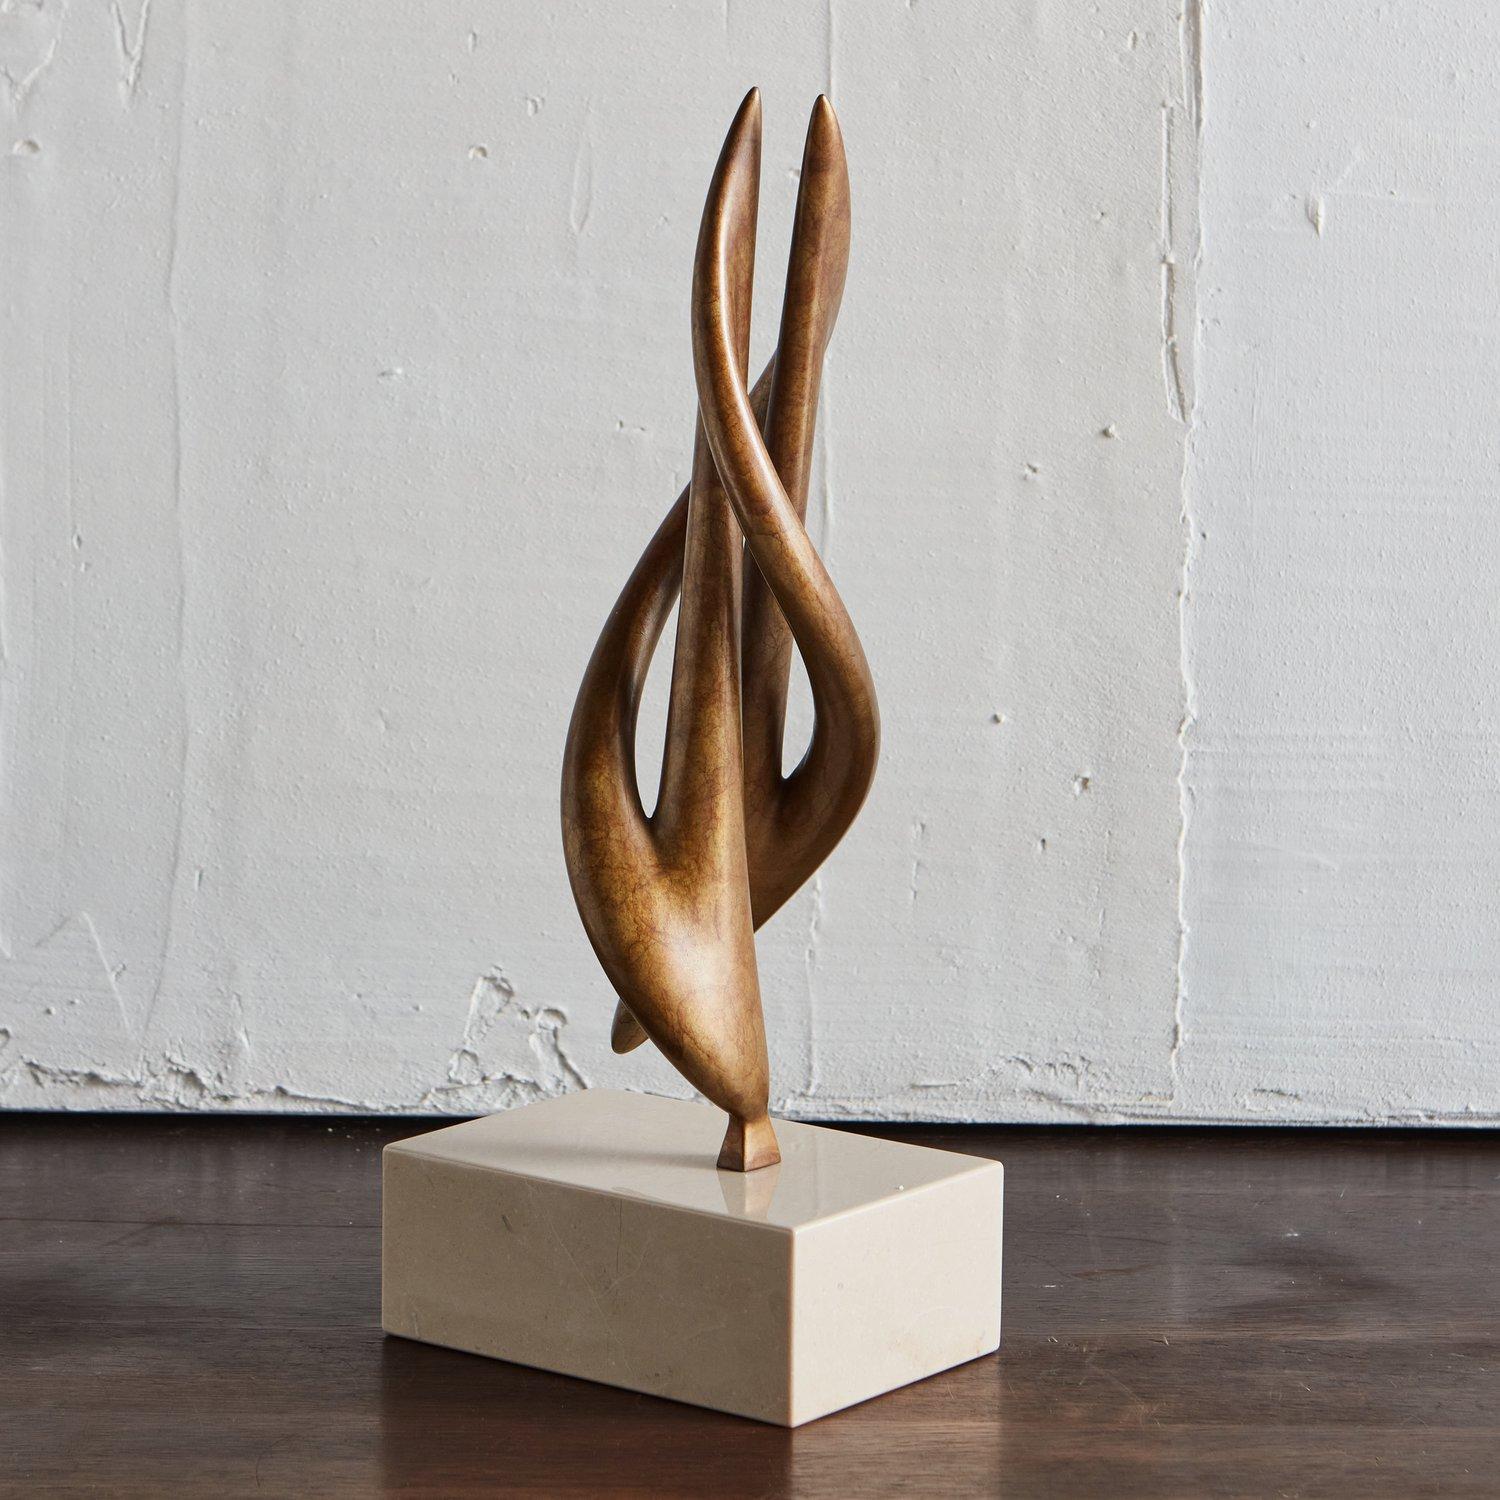 The Telomere Twist Taper sculpture by Chicago artist Karl Geckler. Featured here in an Antique Bronze Finish and mounted on a polished cream marble base.

This piece is available standard in a Satin Bronze Finish for $3,120, with a Polished Black